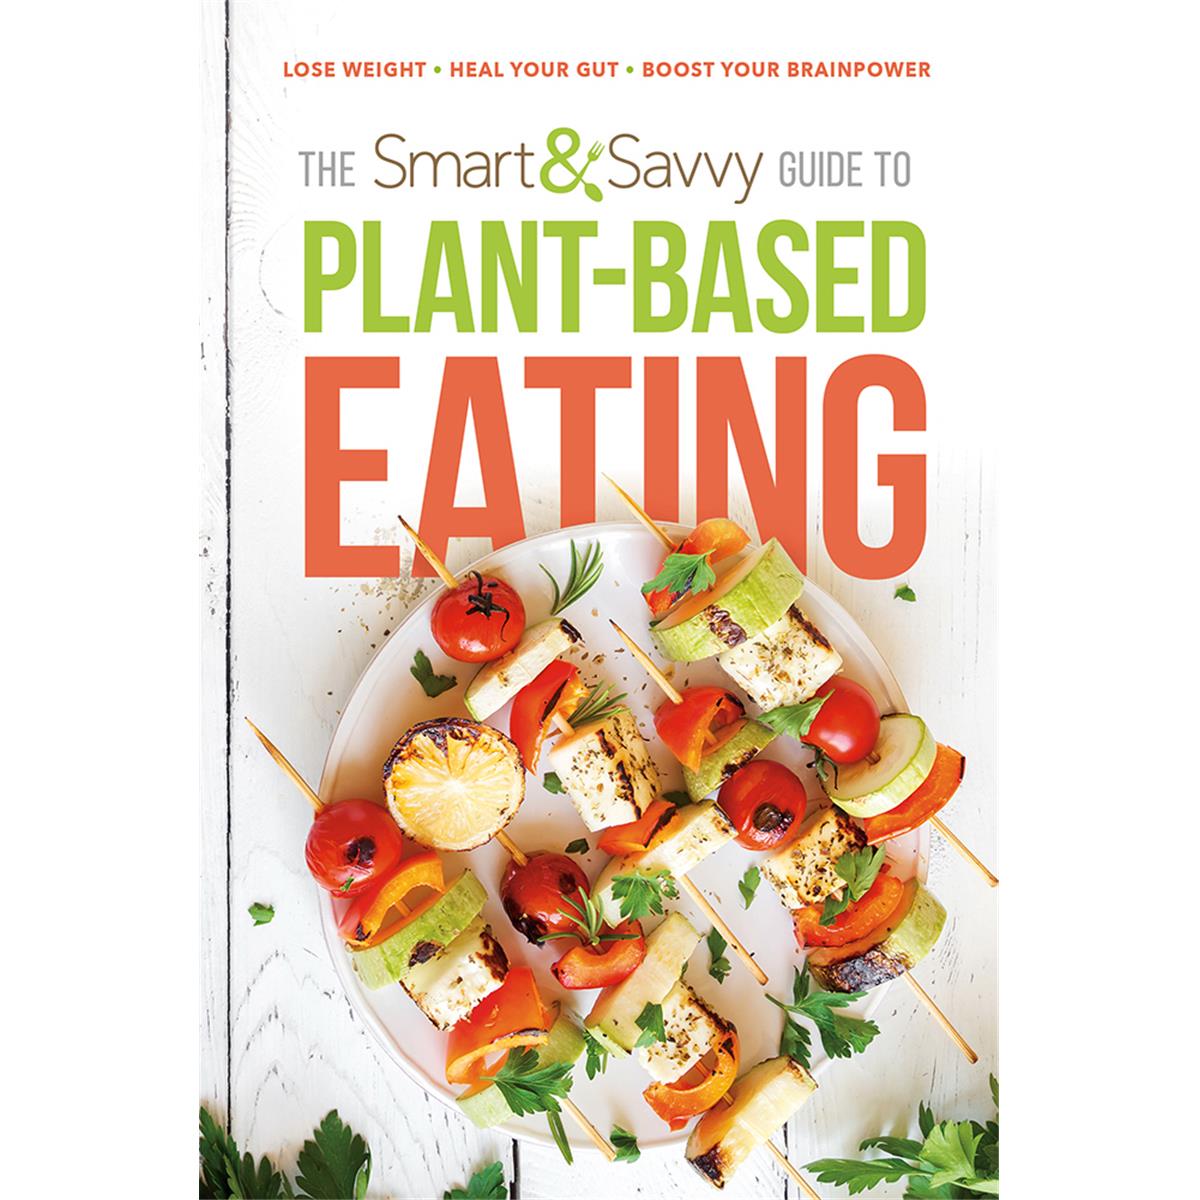 148451 The Smart & Savvy Guide To Plant-based Eating - Mar 2020